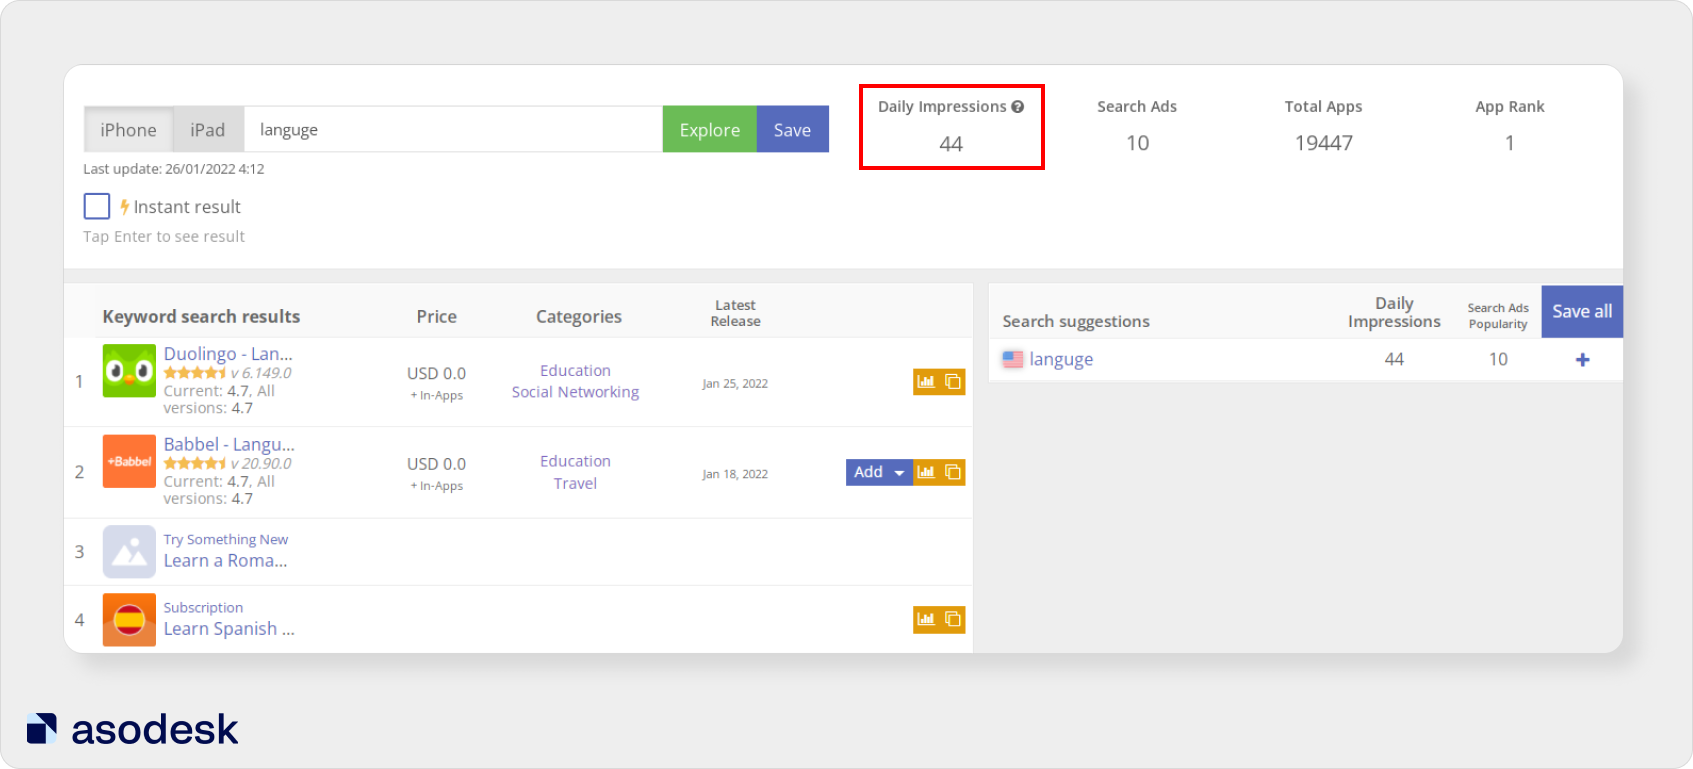 In Asodesk, you can view Daily Impressions for various search terms from the App Store and Google Play